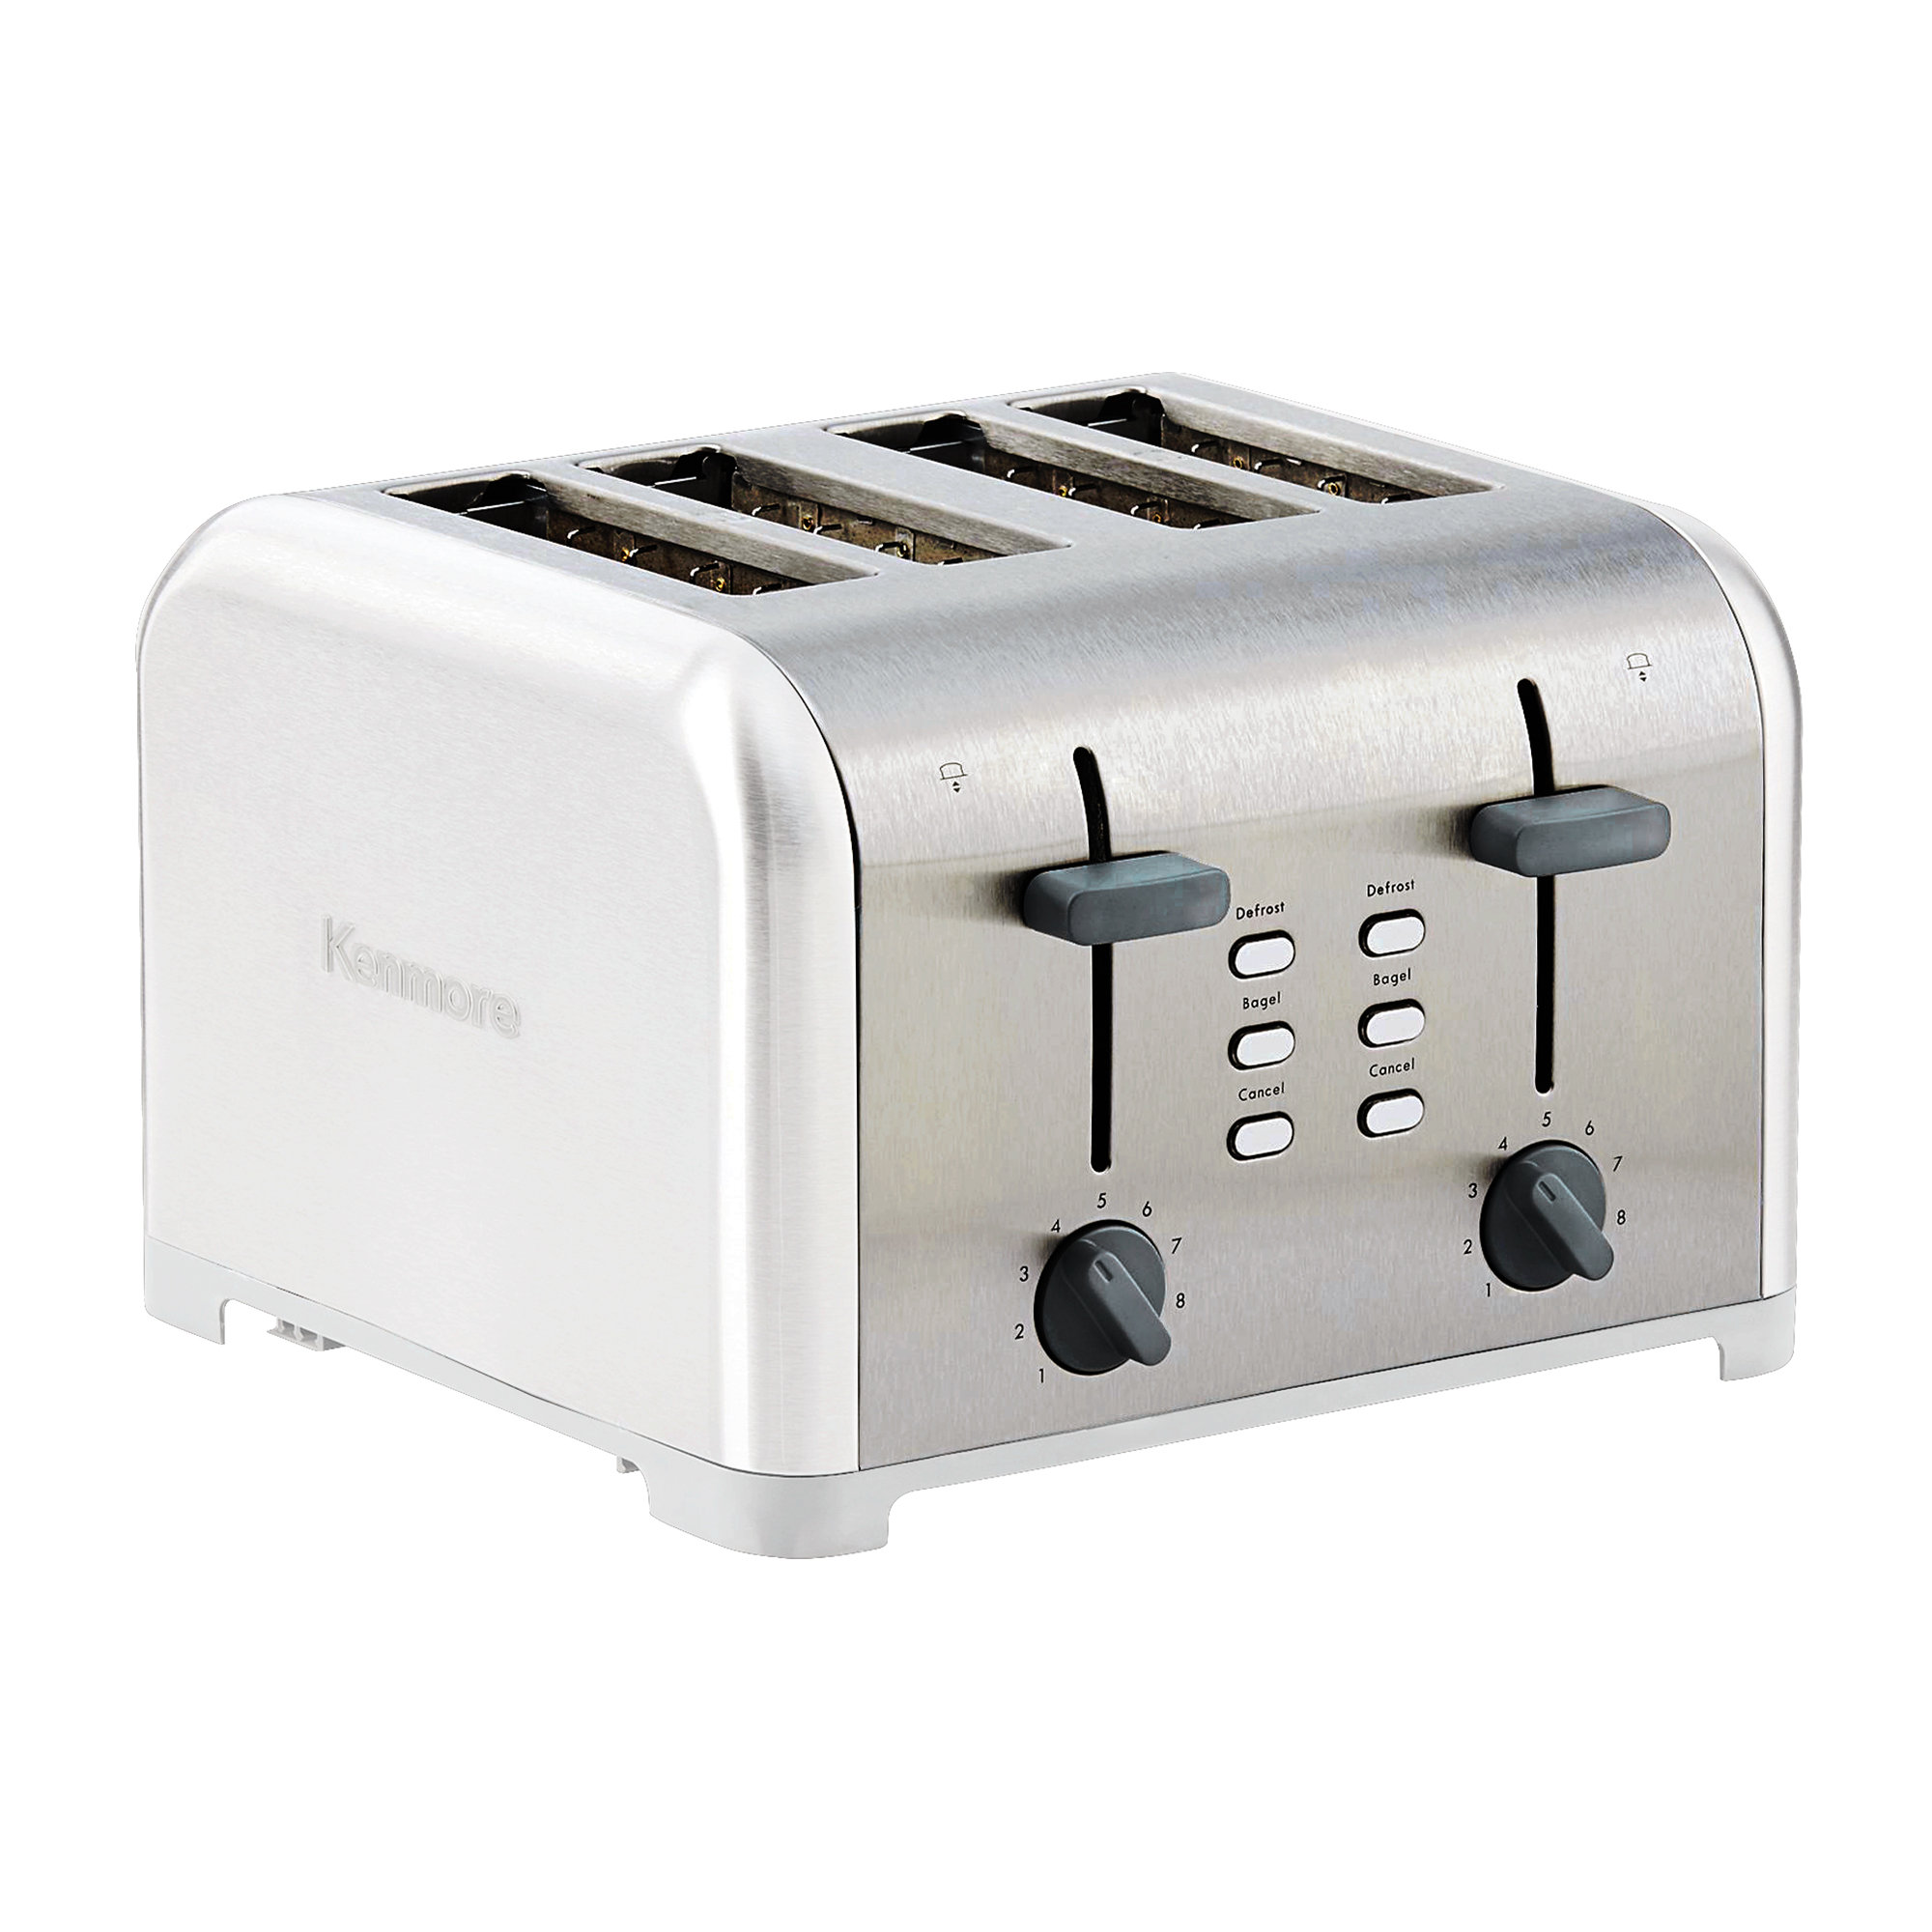 Geek Chef 4 Slice Toaster,Stainless Steel Bread Bagel Toaster With